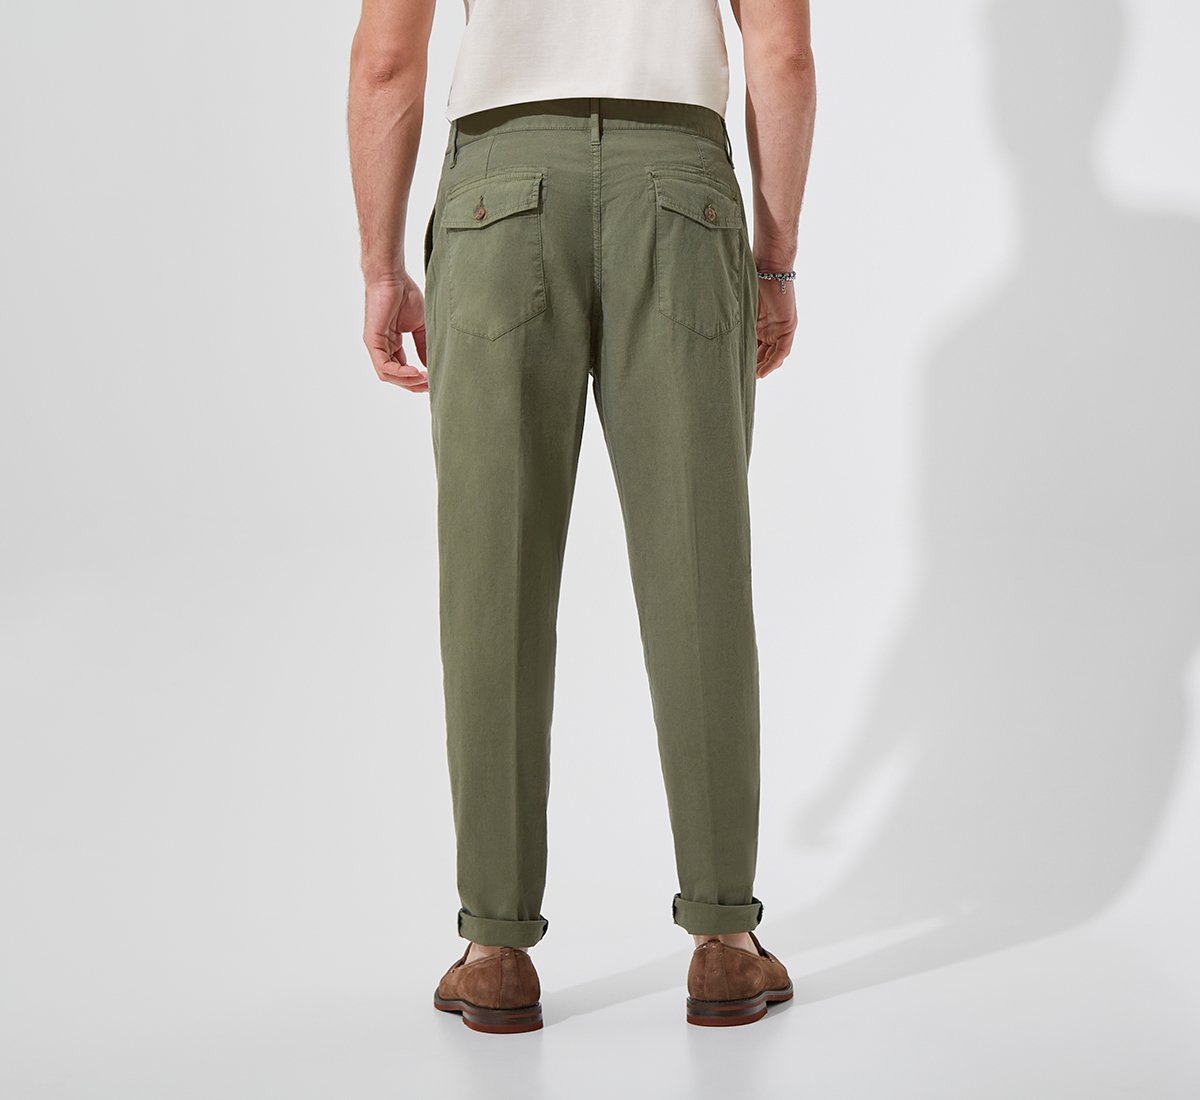 Green Chino Pants with Front Pockets